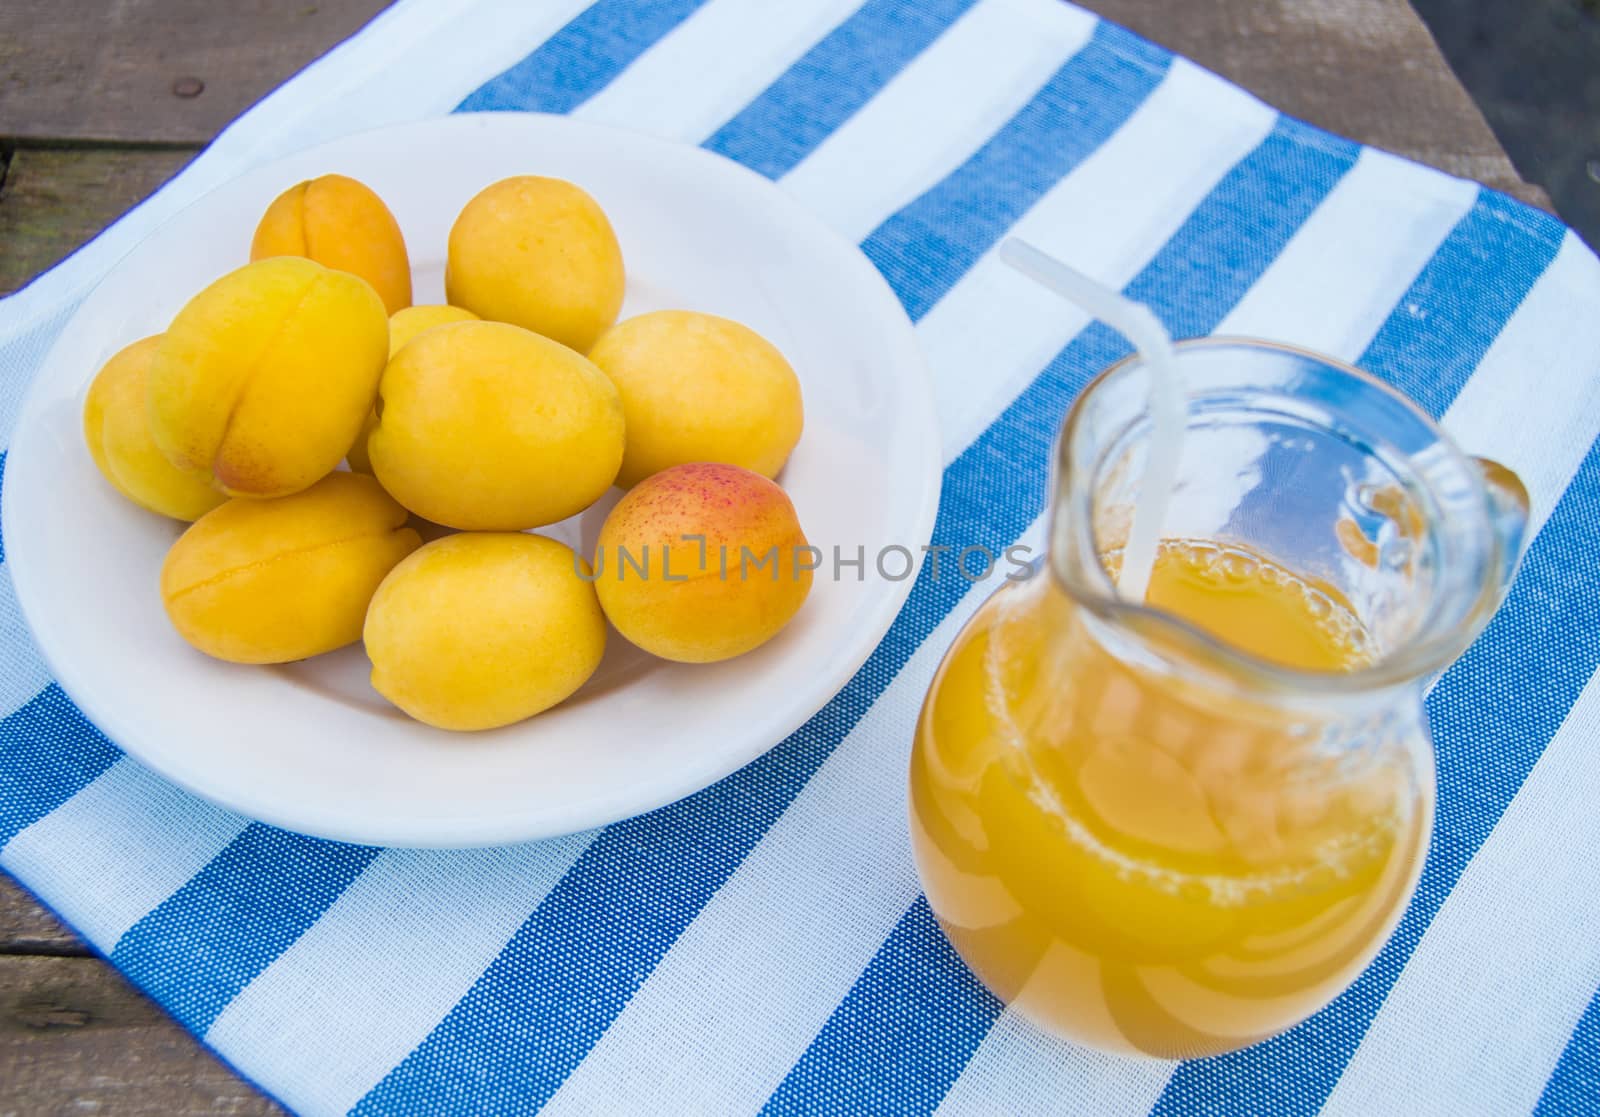 apricot juice in a Glass jug with straw and fruit on napkin by claire_lucia